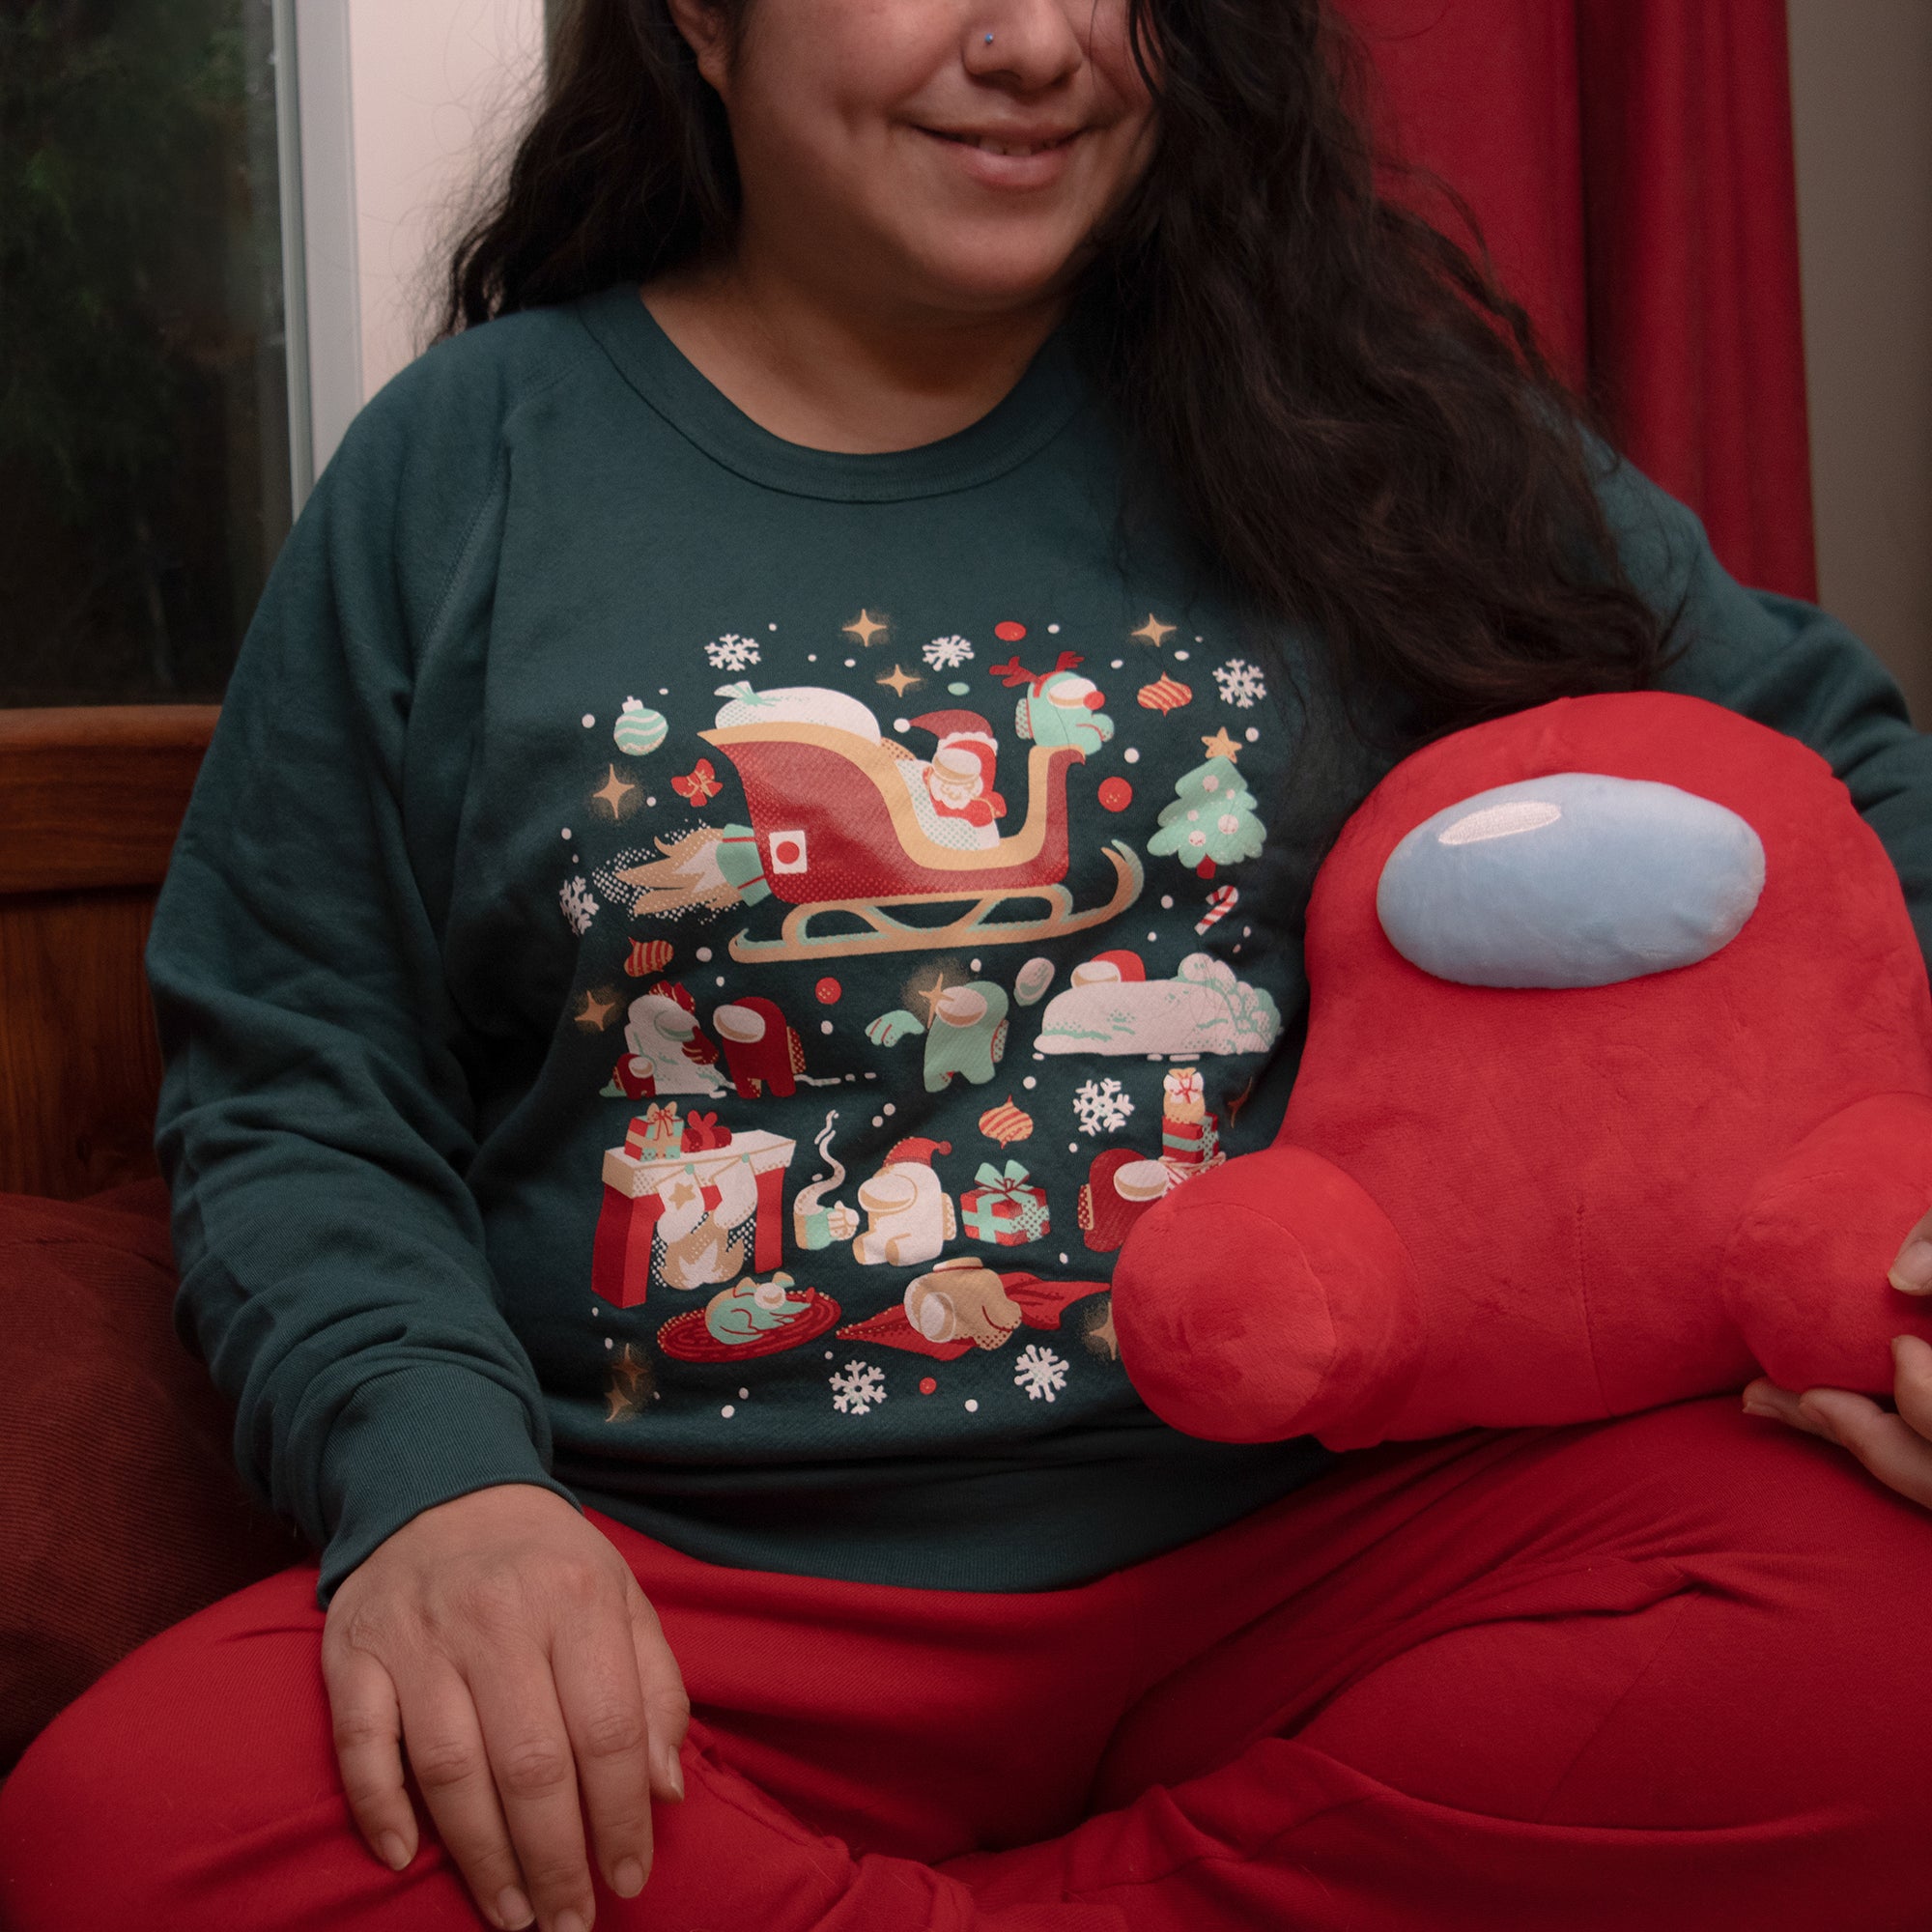 A flat lay photograph of a green longsleeve sweatshirt on a white background. The garment’s design depicts several Crewmates engaged in various holiday activities such as building a snowman, throwing snowballs, making snowforts, relaxing with cocoa, carrying presents, and taking naps. Flying overhead is a Santa and Rudolph Crewmate in a jet engine sleigh. The scene is surrounded by christmas trees, ornaments, candy canes, snow, snowflakes, bows, red noses, and starry sparkles. Designed by Mengmeng Liu